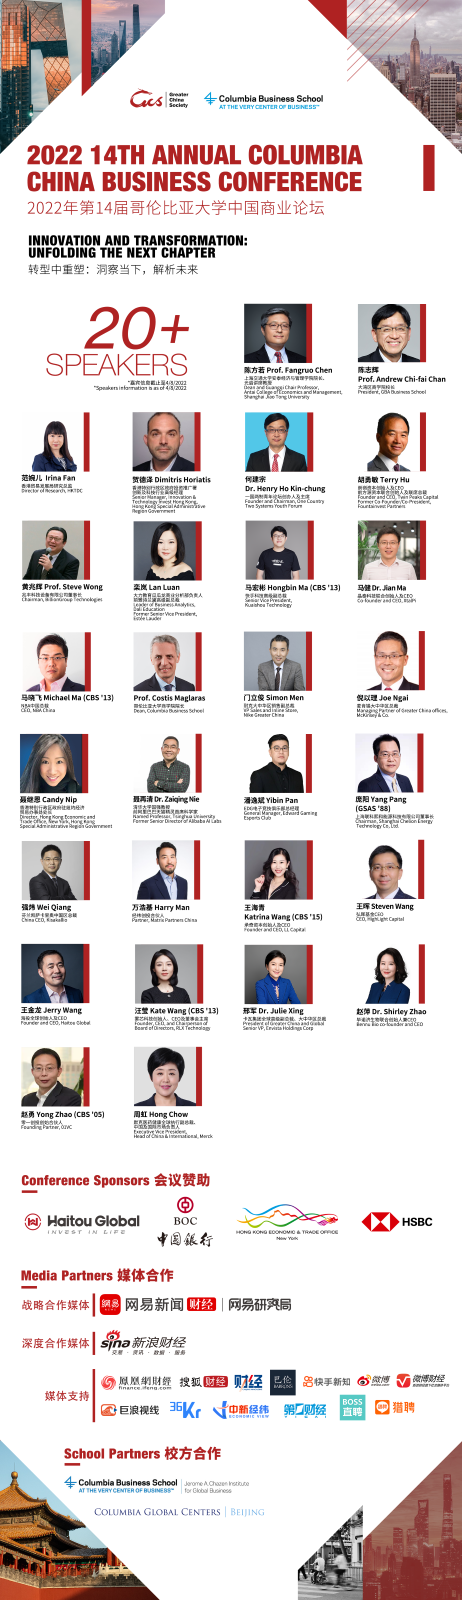 2022 14th Columbia China Business Conference, Wednesday, May 18, 2022, Press release picture